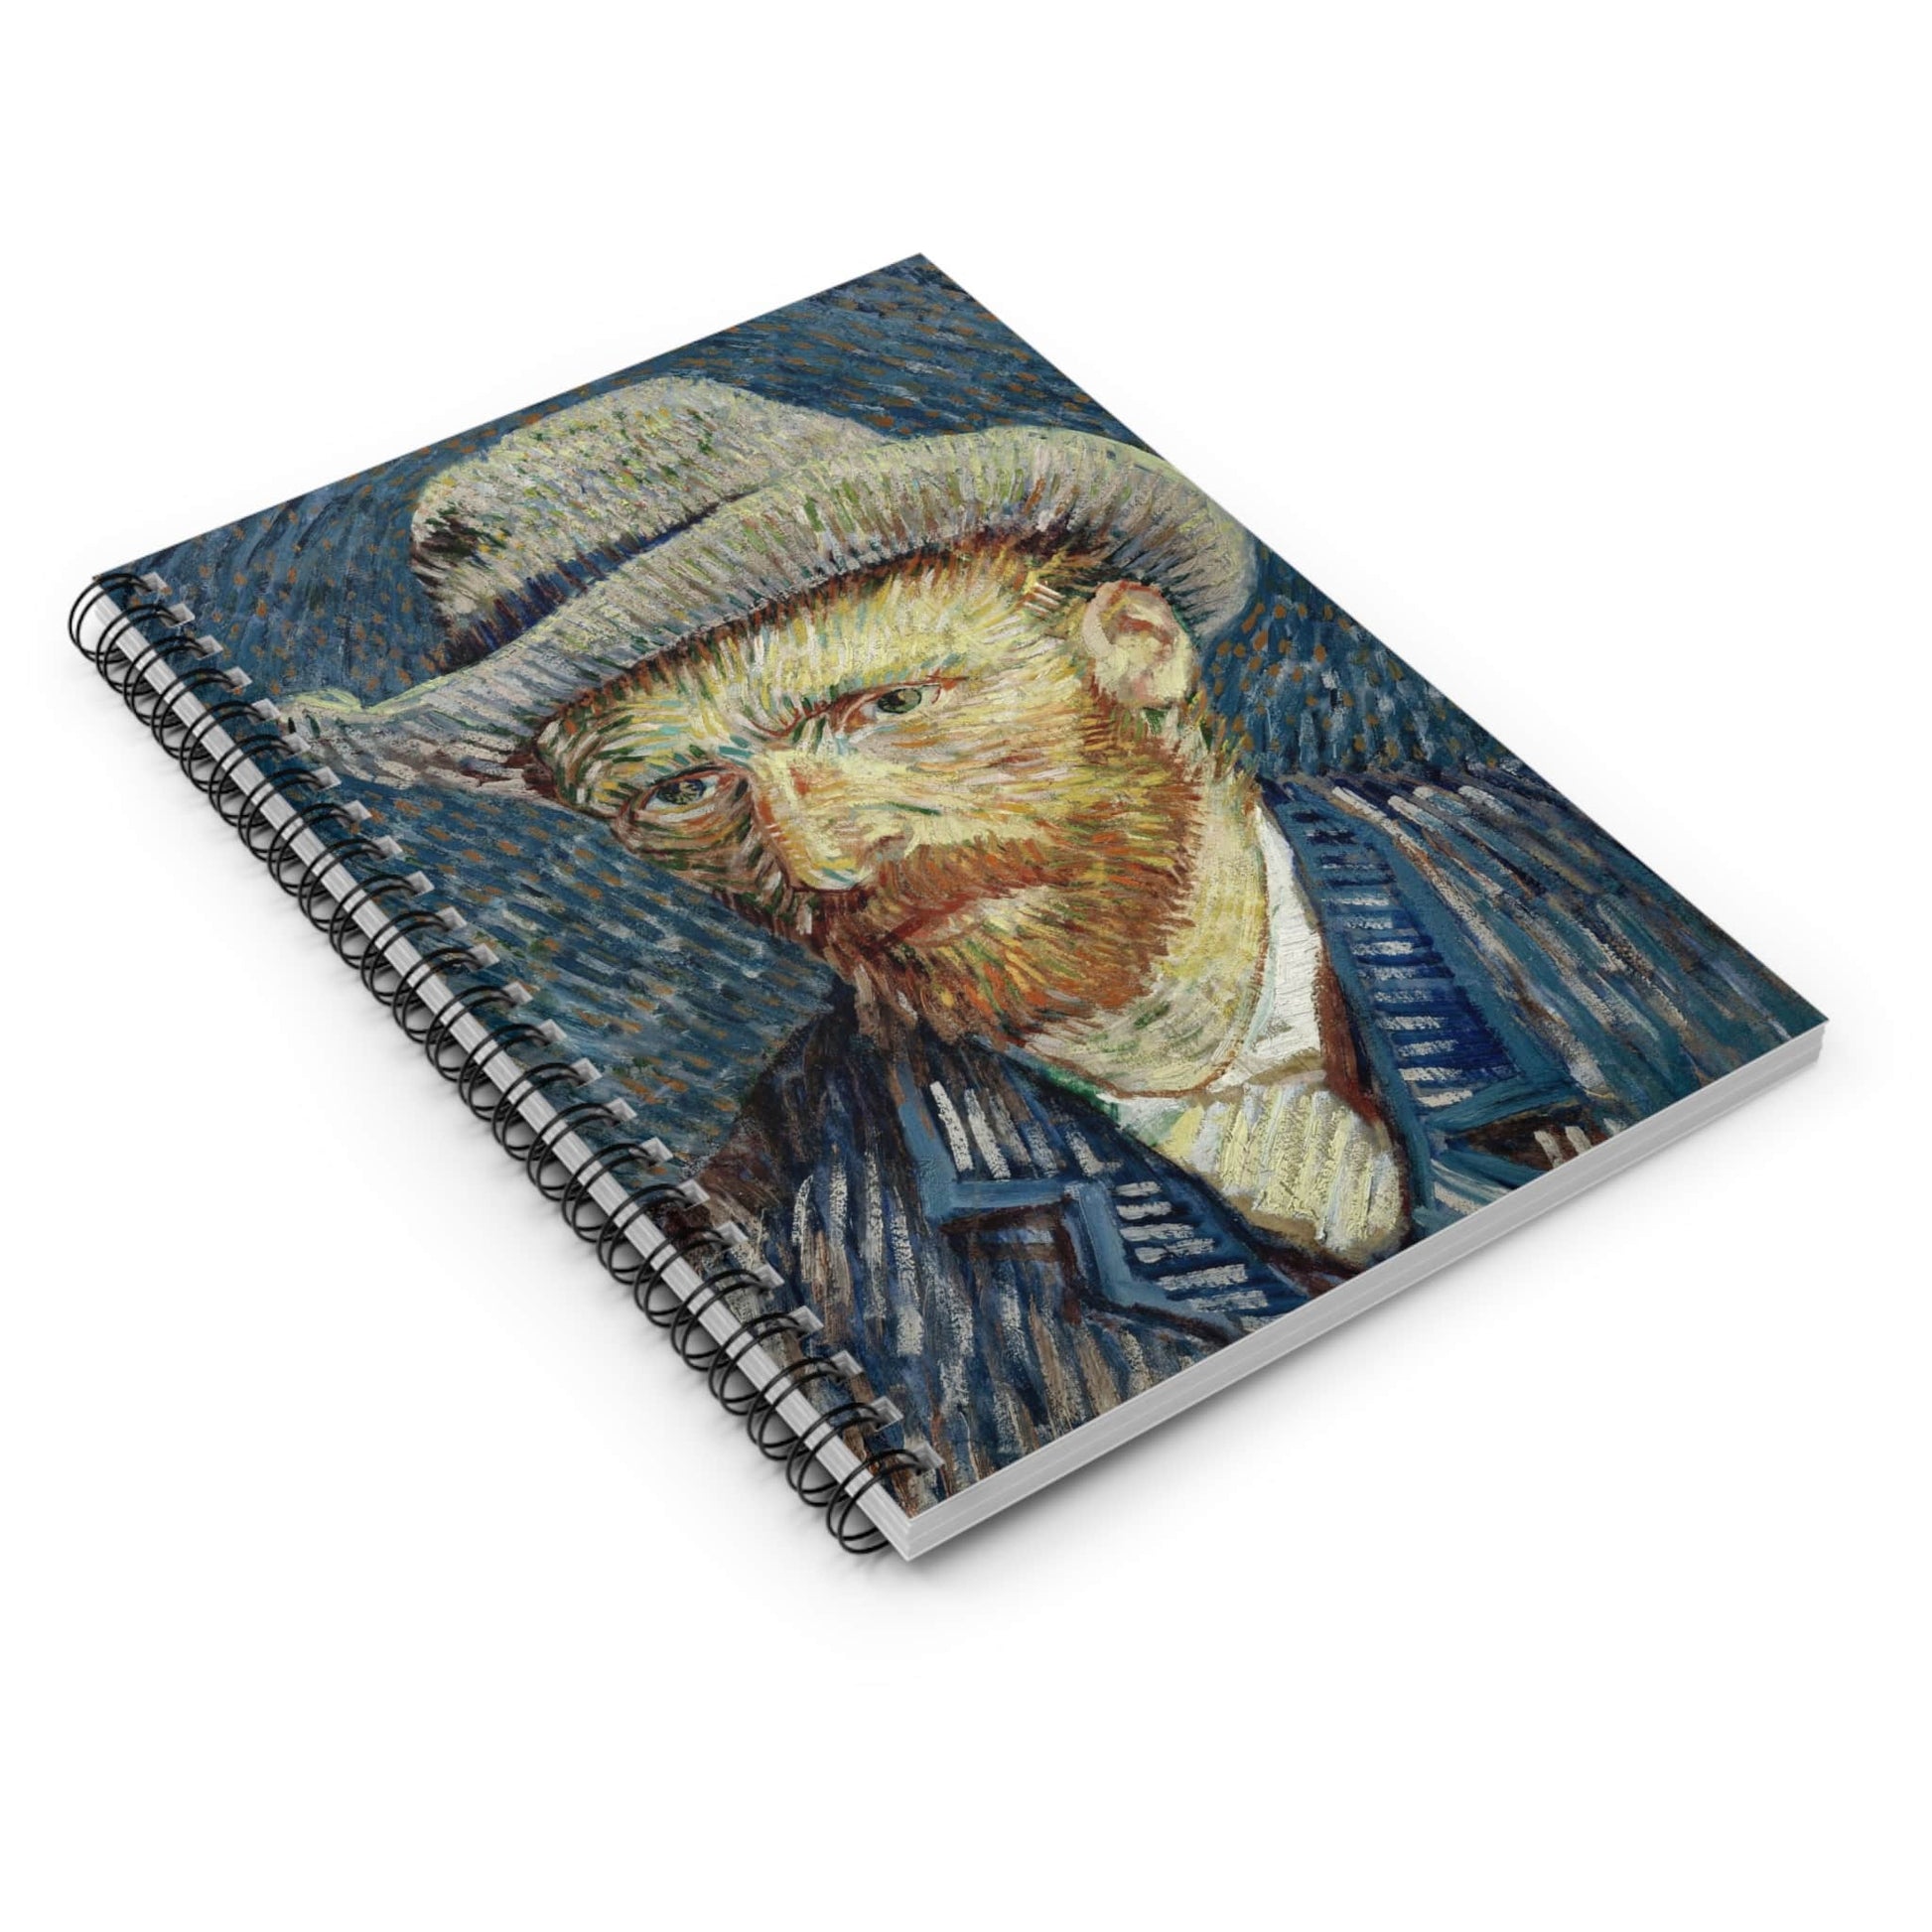 Cool van Gogh Spiral Notebook Laying Flat on White Surface